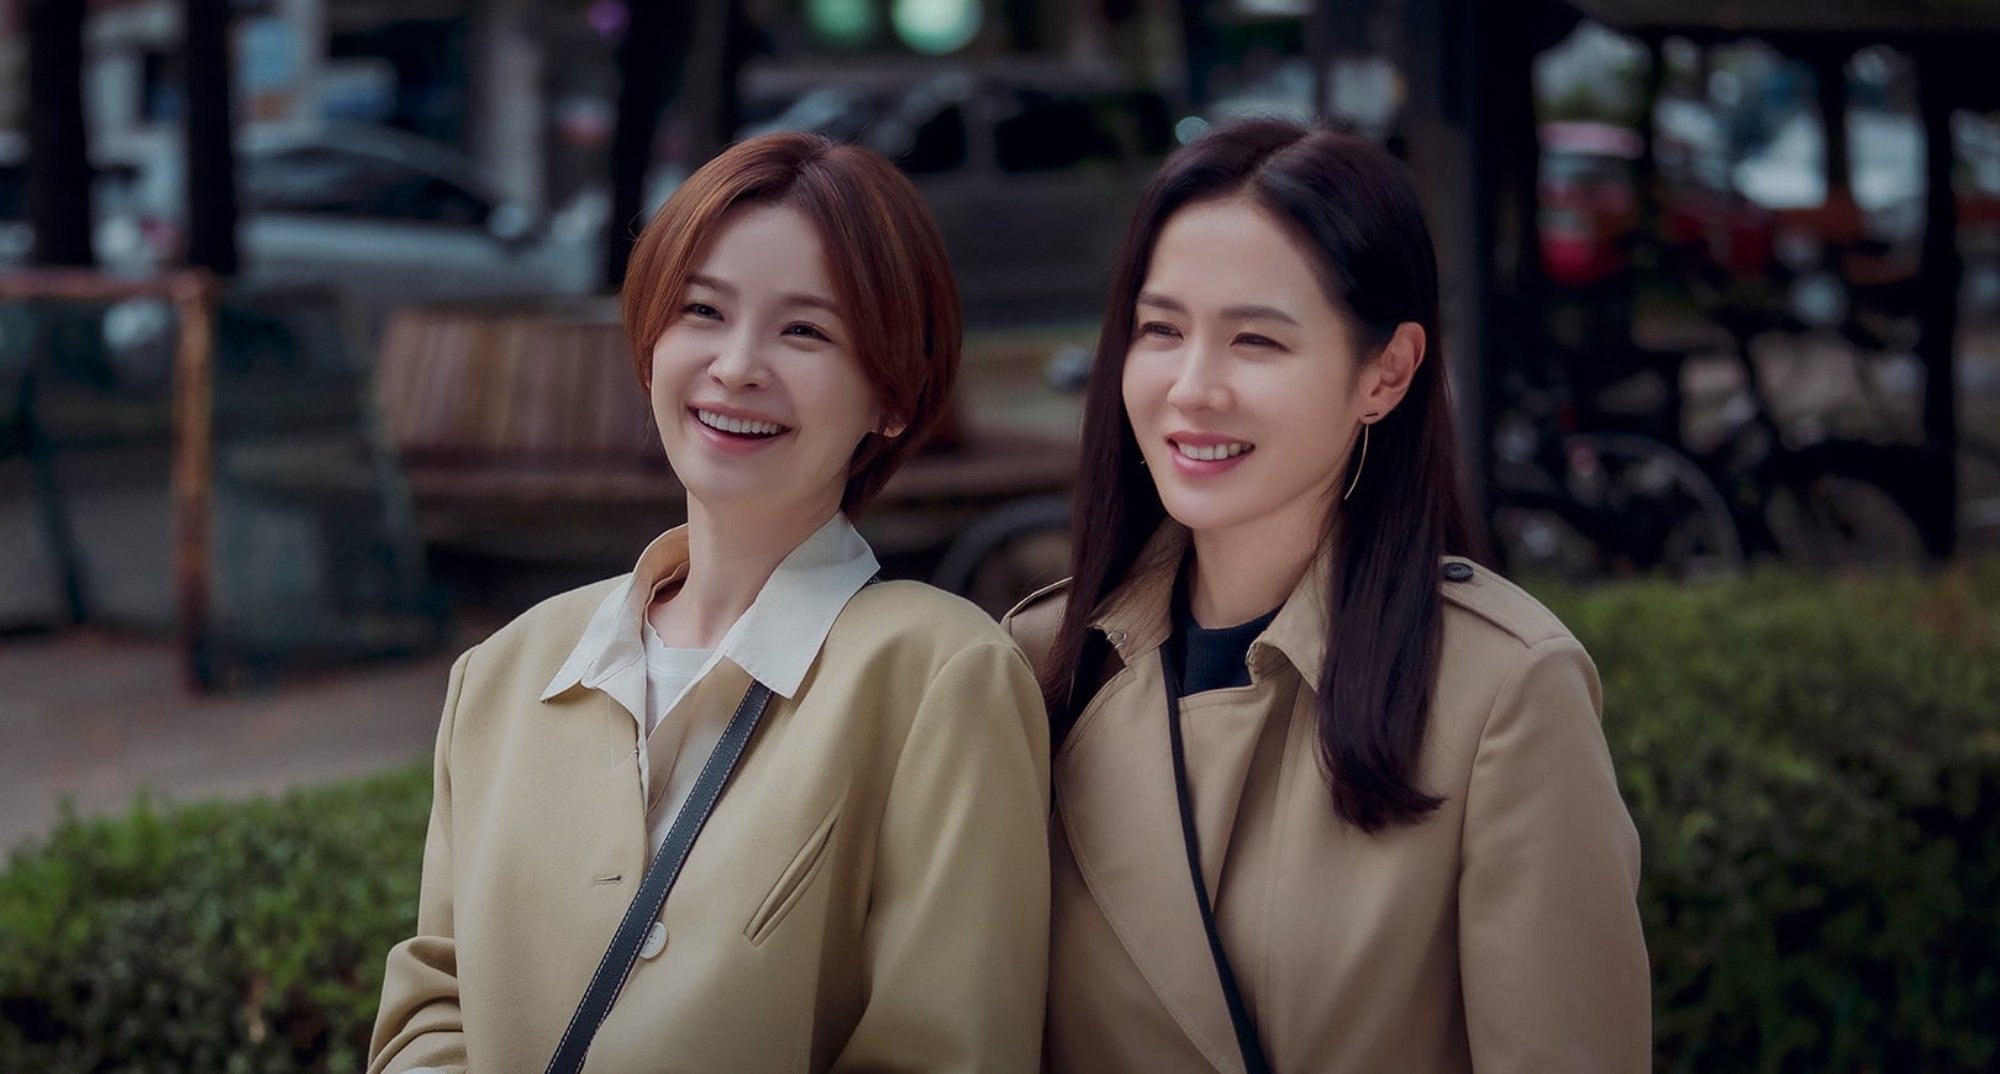 Jeon Mi-do and Son Ye-jin in 'Thirty-Nine' K-drama standing next to each other.